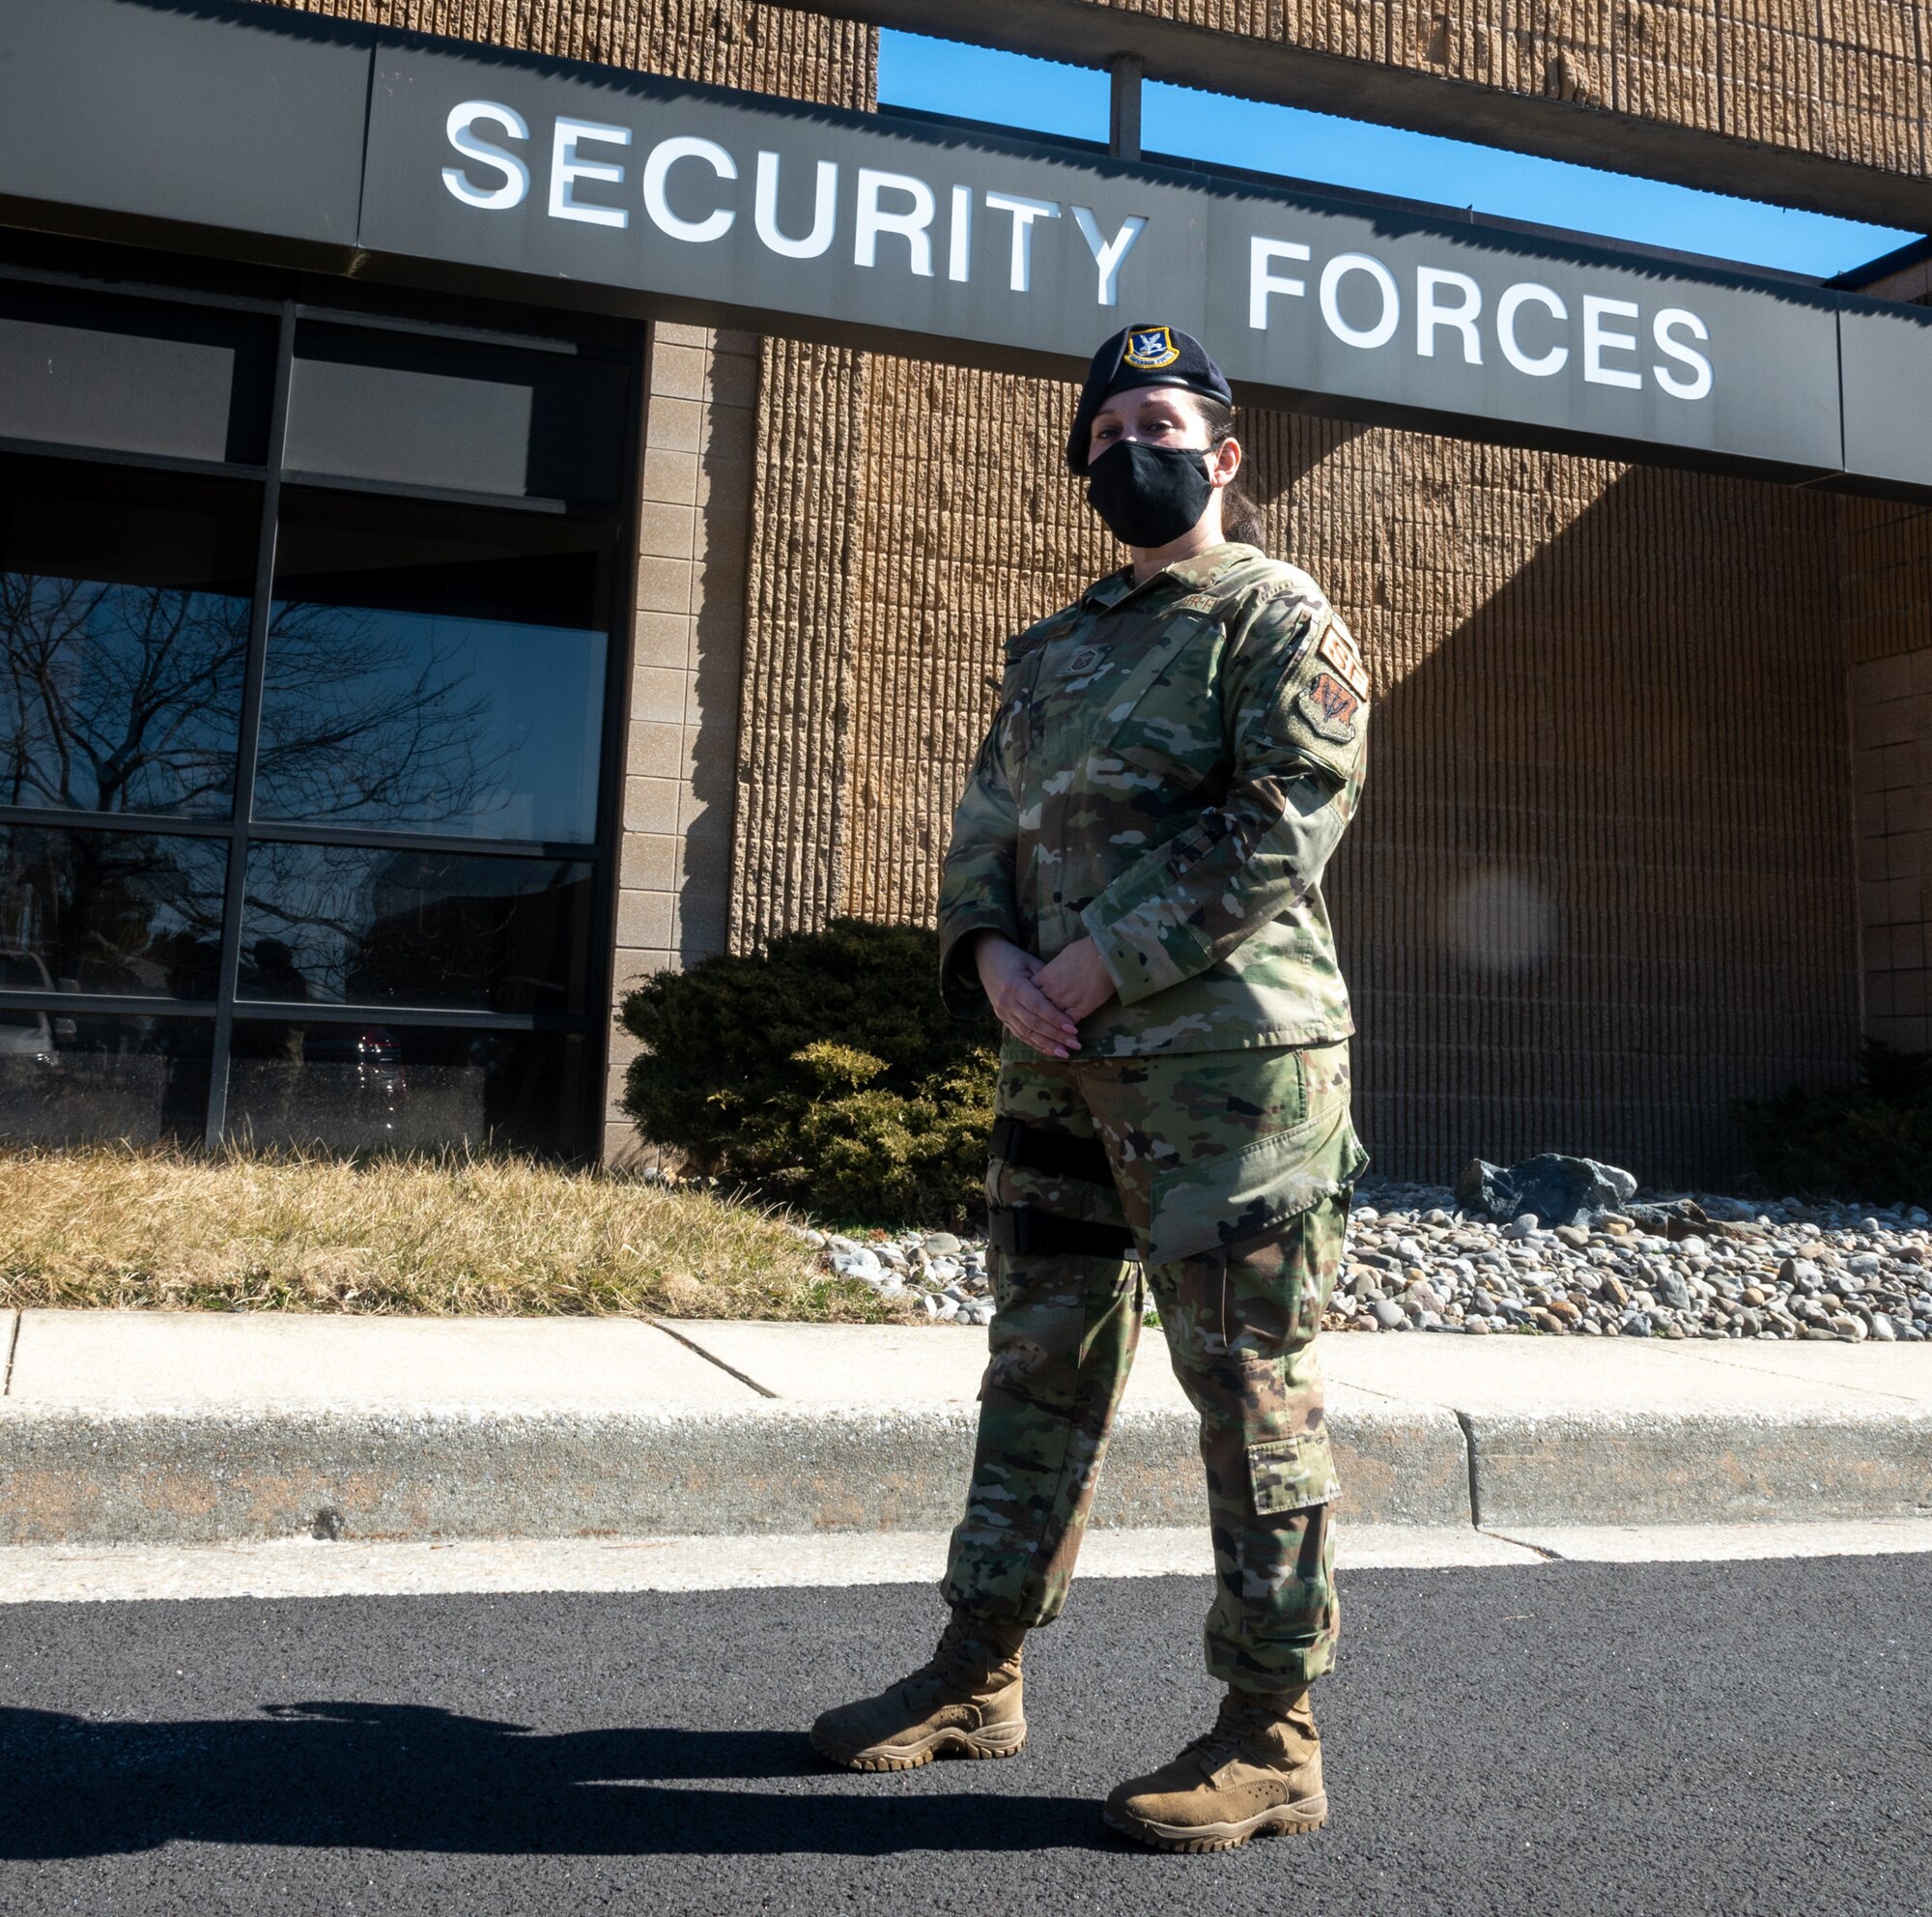 U.S. Air Force Master Sgt. Wanda Rodriguez, 175th Security Forces superintendent, poses outside the Security Forces building at Warfield Air National Guard Base at Martin State Airport, Middle River, Md., on March 5th, 2021.